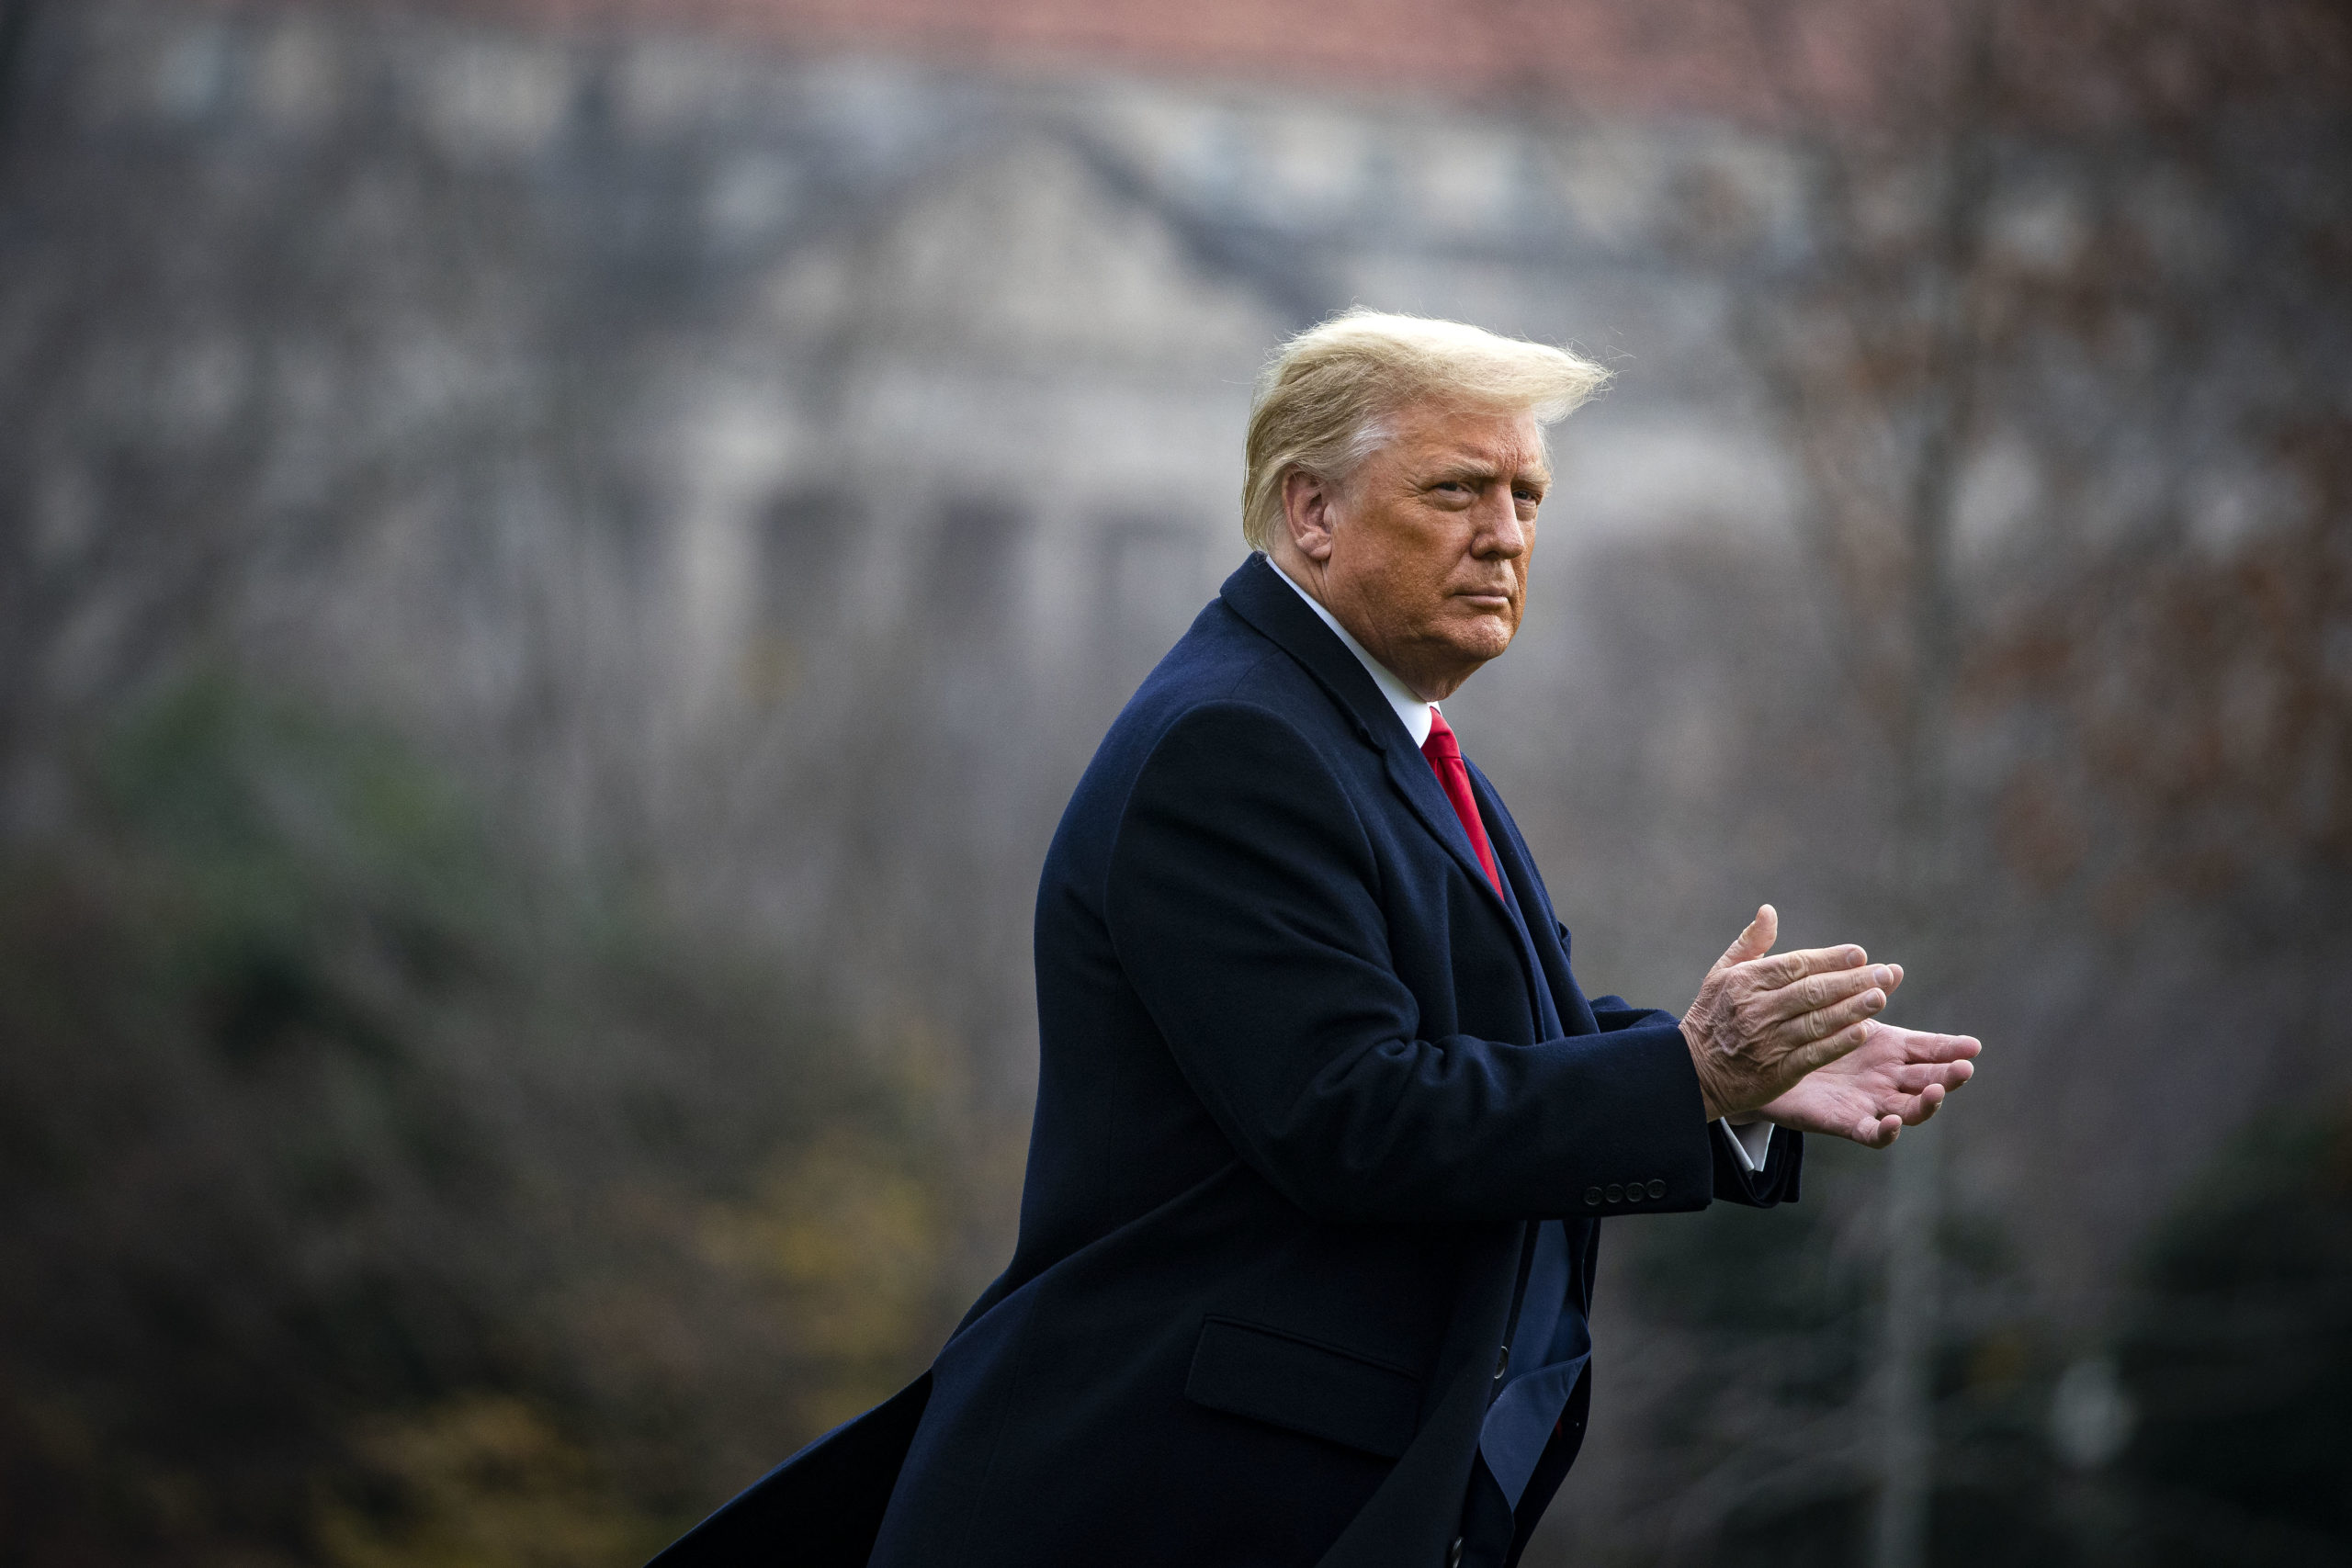 WASHINGTON, DC - DECEMBER 12: U.S. President Donald Trump departs on the South Lawn of the White House, on December 12, 2020 in Washington, DC. Trump is traveling to the Army versus Navy Football Game at the United States Military Academy in West Point, NY. (Photo by Al Drago/Getty Images)